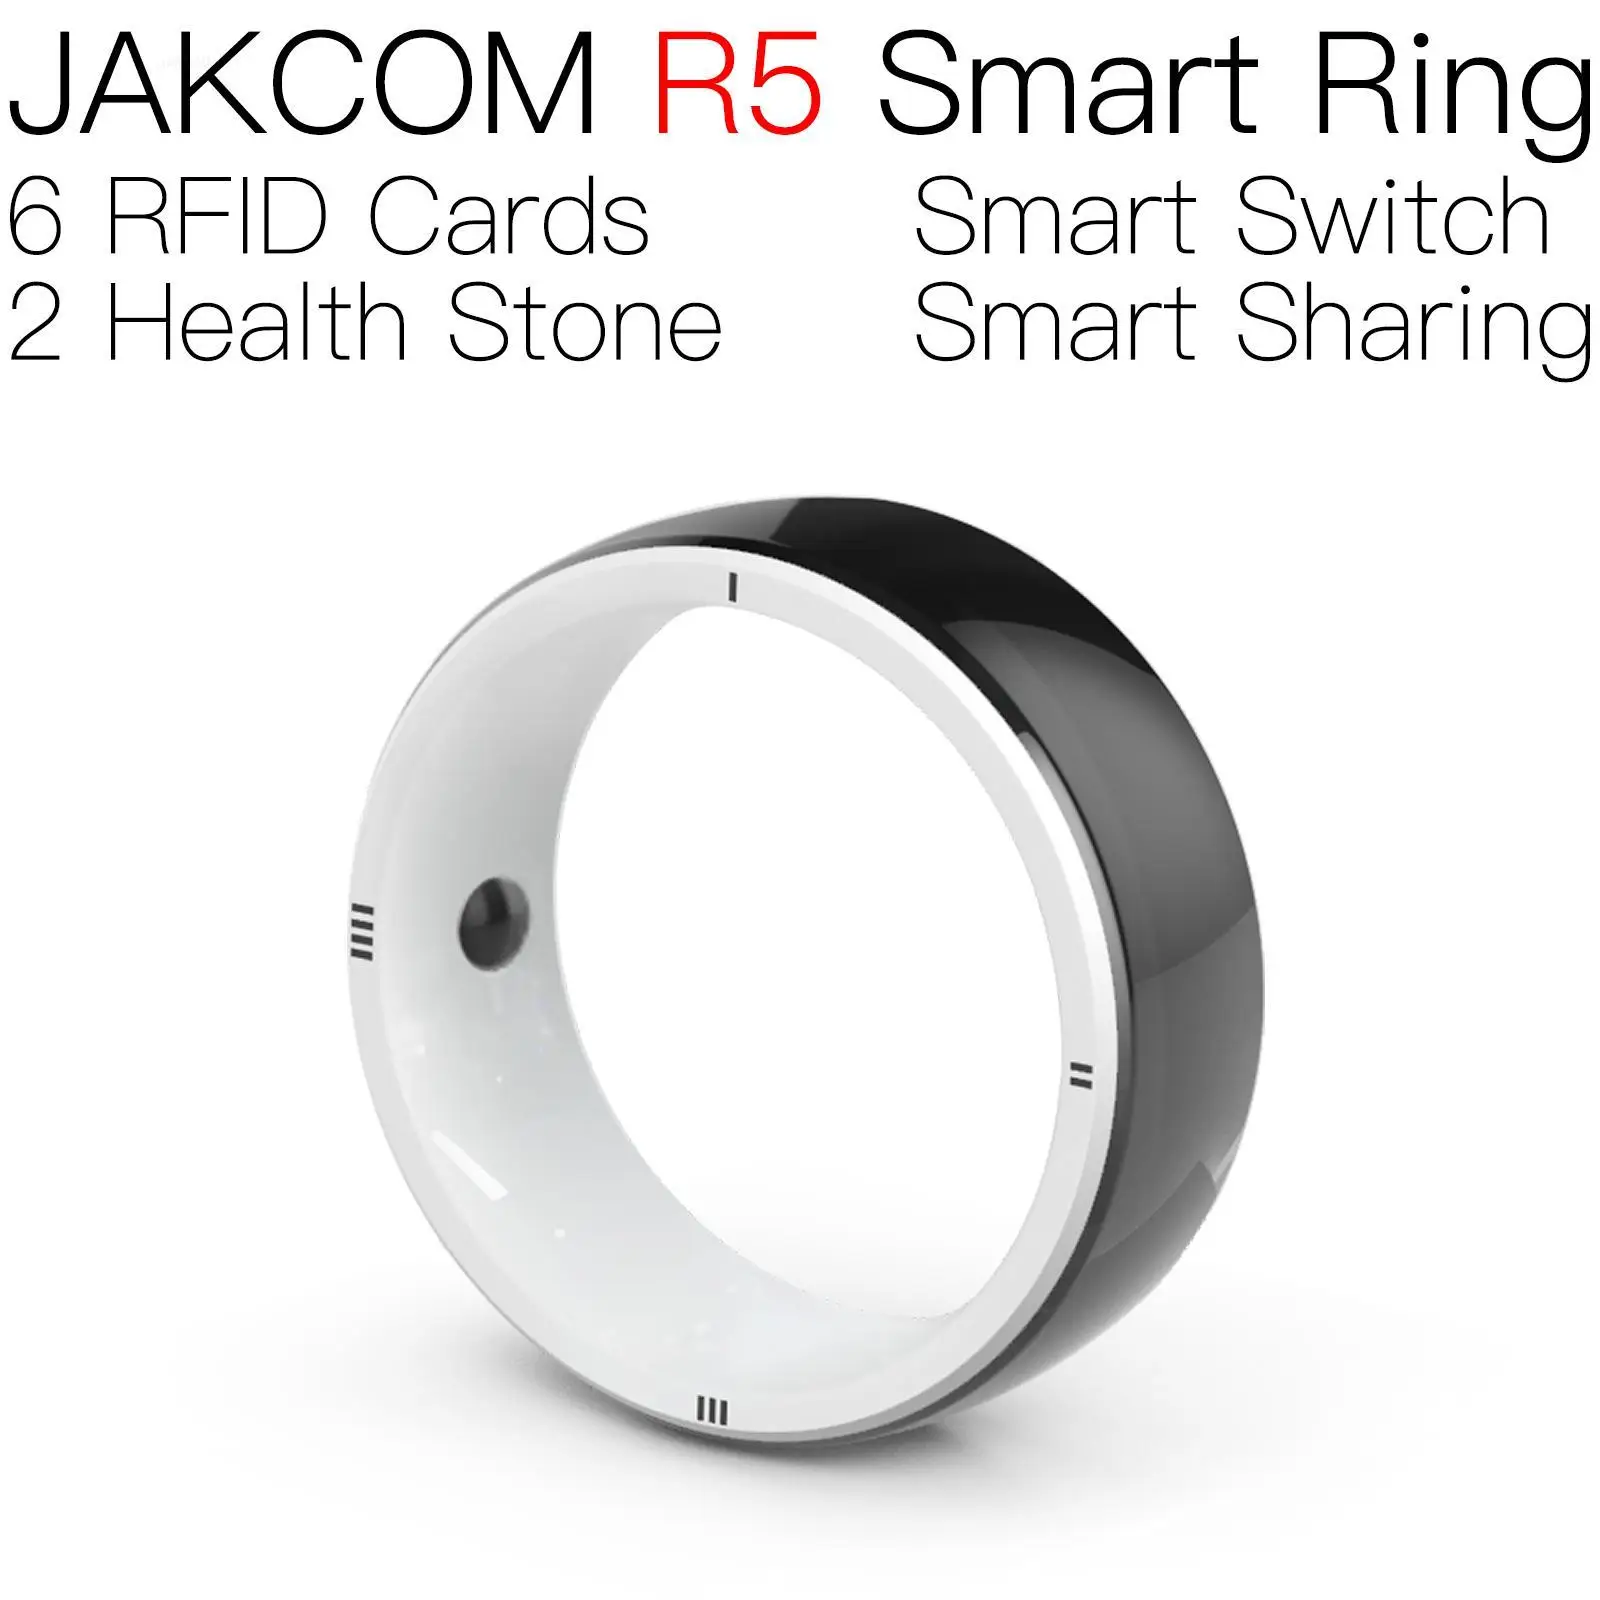 

JAKCOM R5 Smart Ring Nice than rfid t5577 tag rewritable dog kit magnet for water meter to s50 7 bytes sticker 125khz cell uid